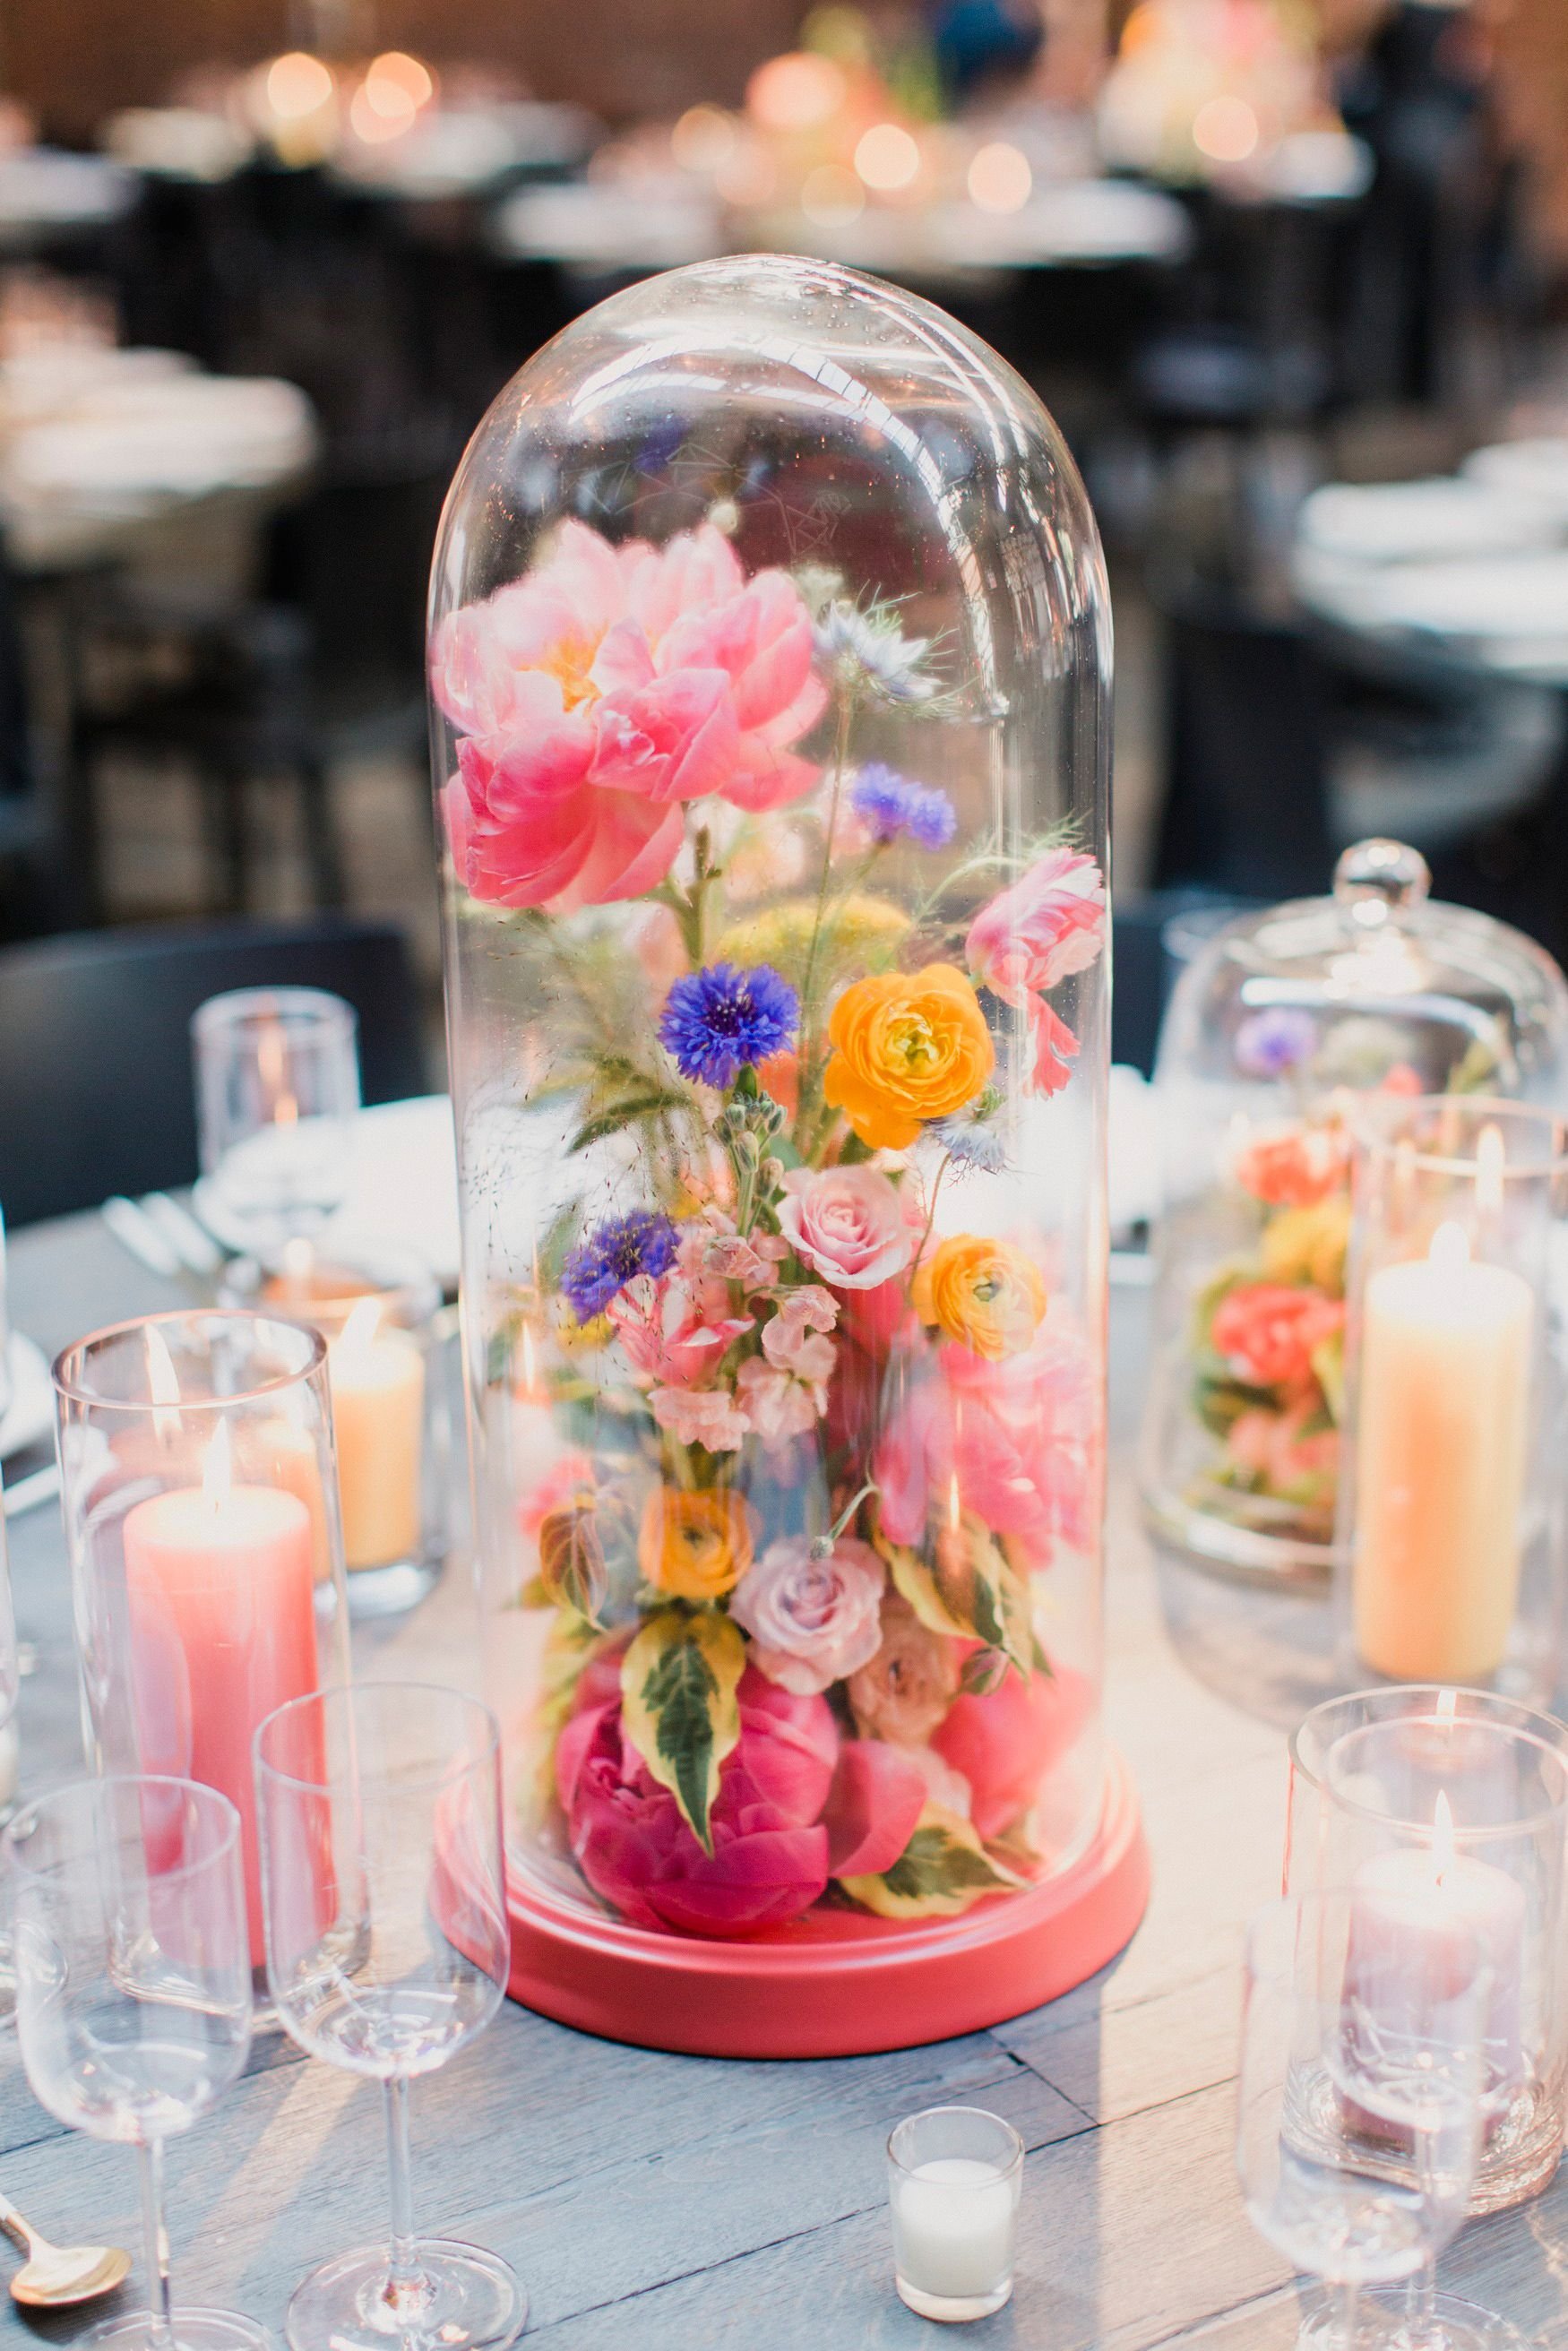 Unique Wedding Centerpieces Your Guests Will Never Forget.jpg